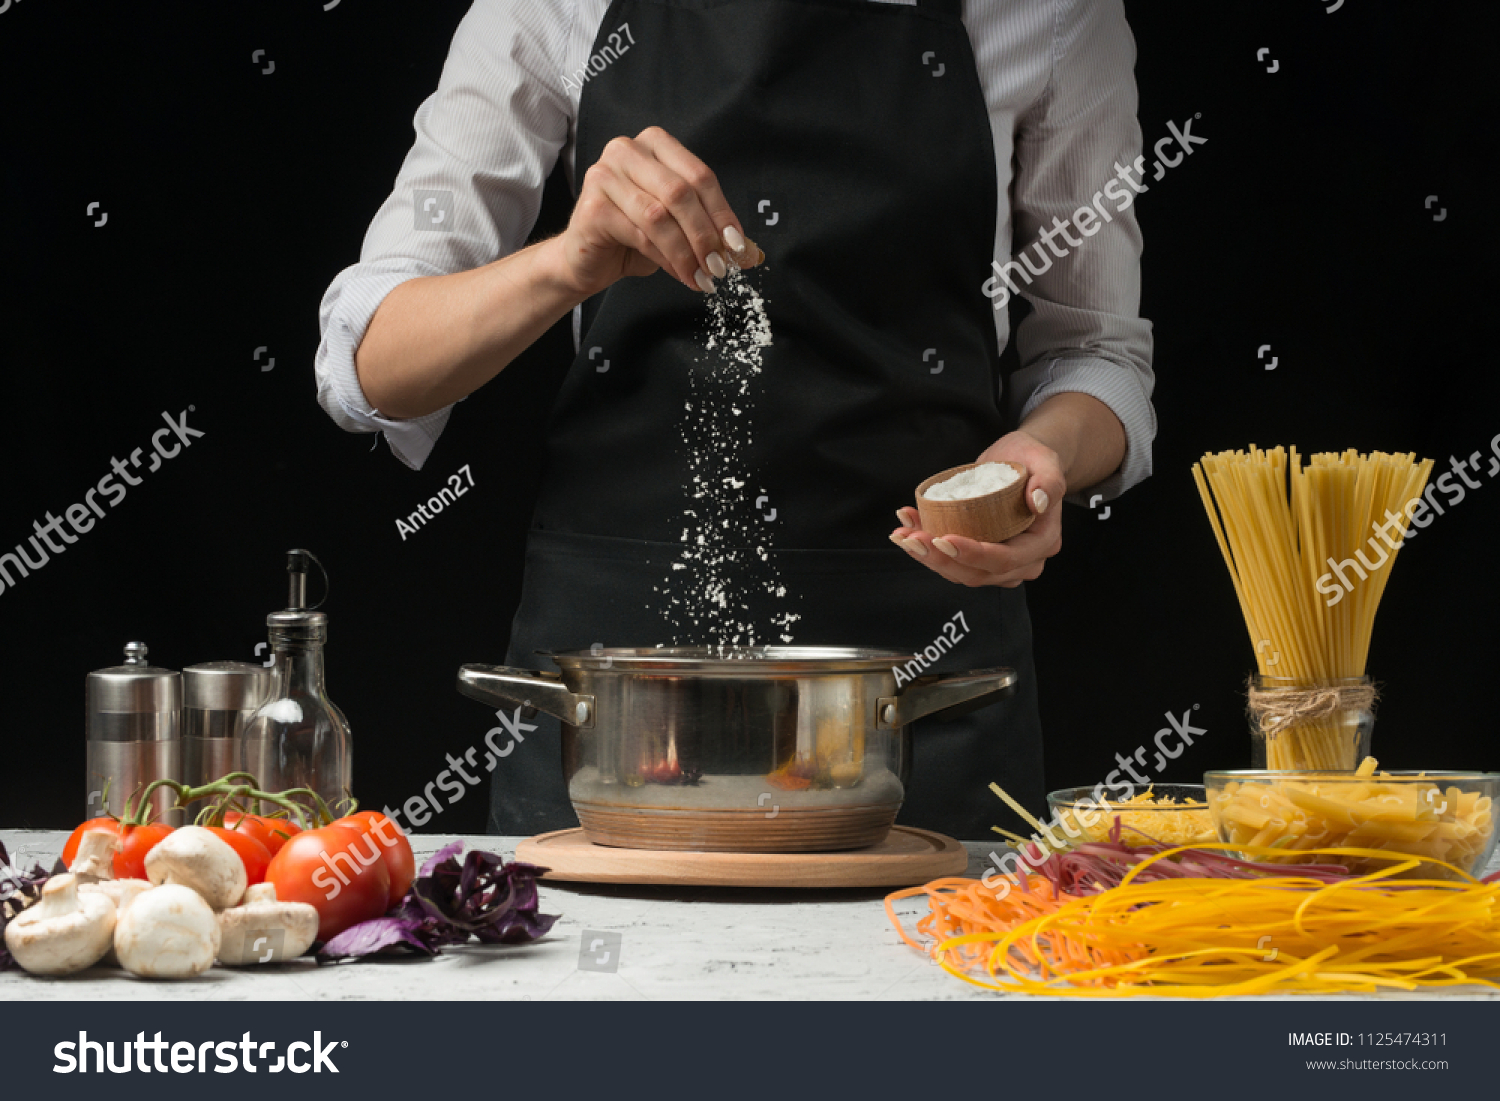 The chef prepares spaghetti and pasta, salt water, against a dark background, the concept of cooking #1125474311